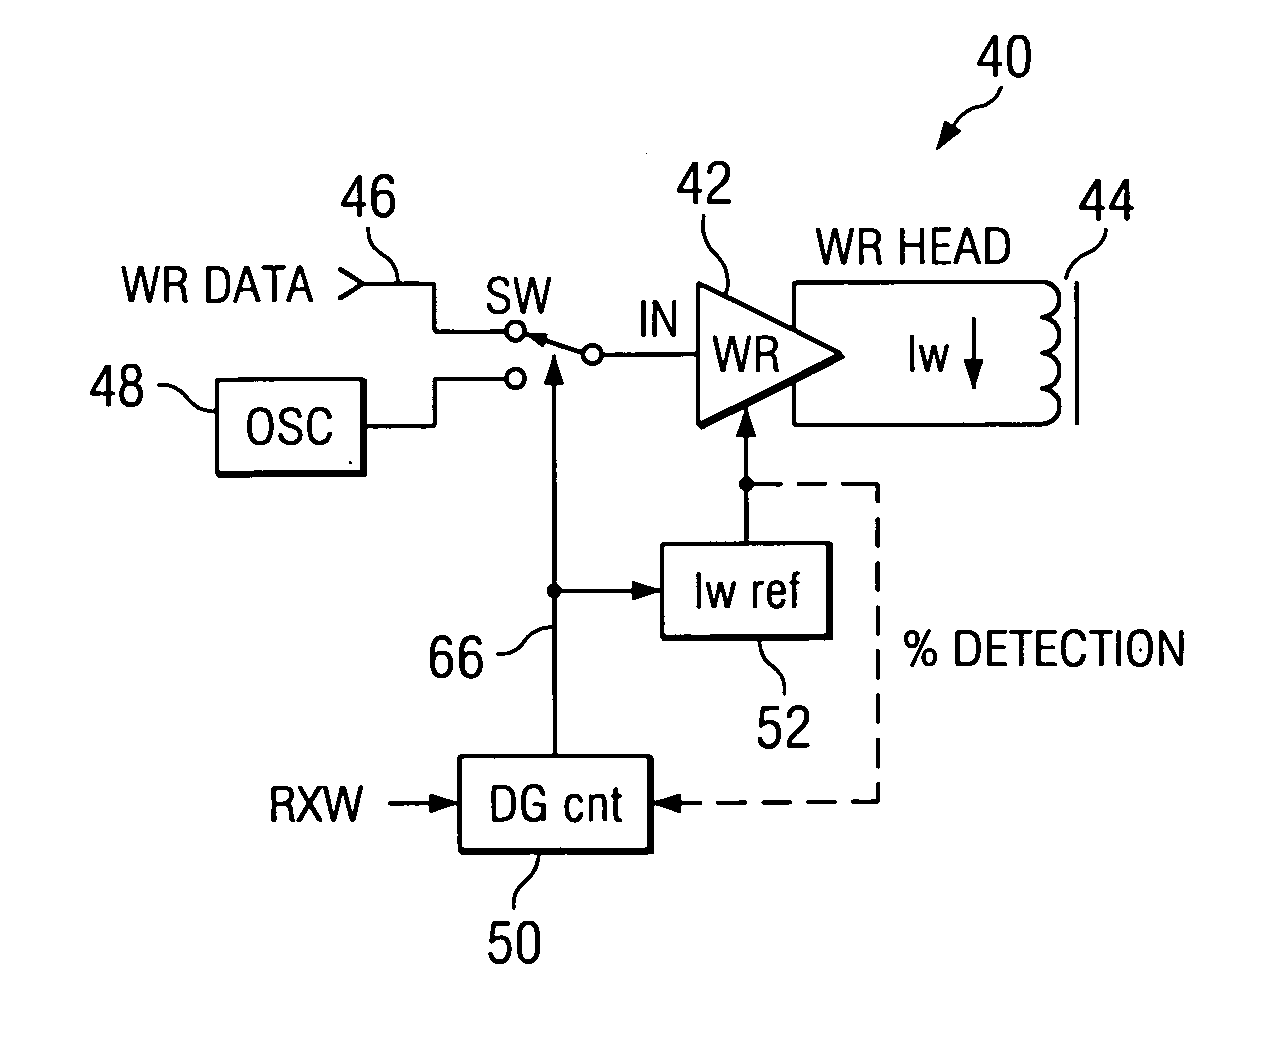 Degaussing for write head